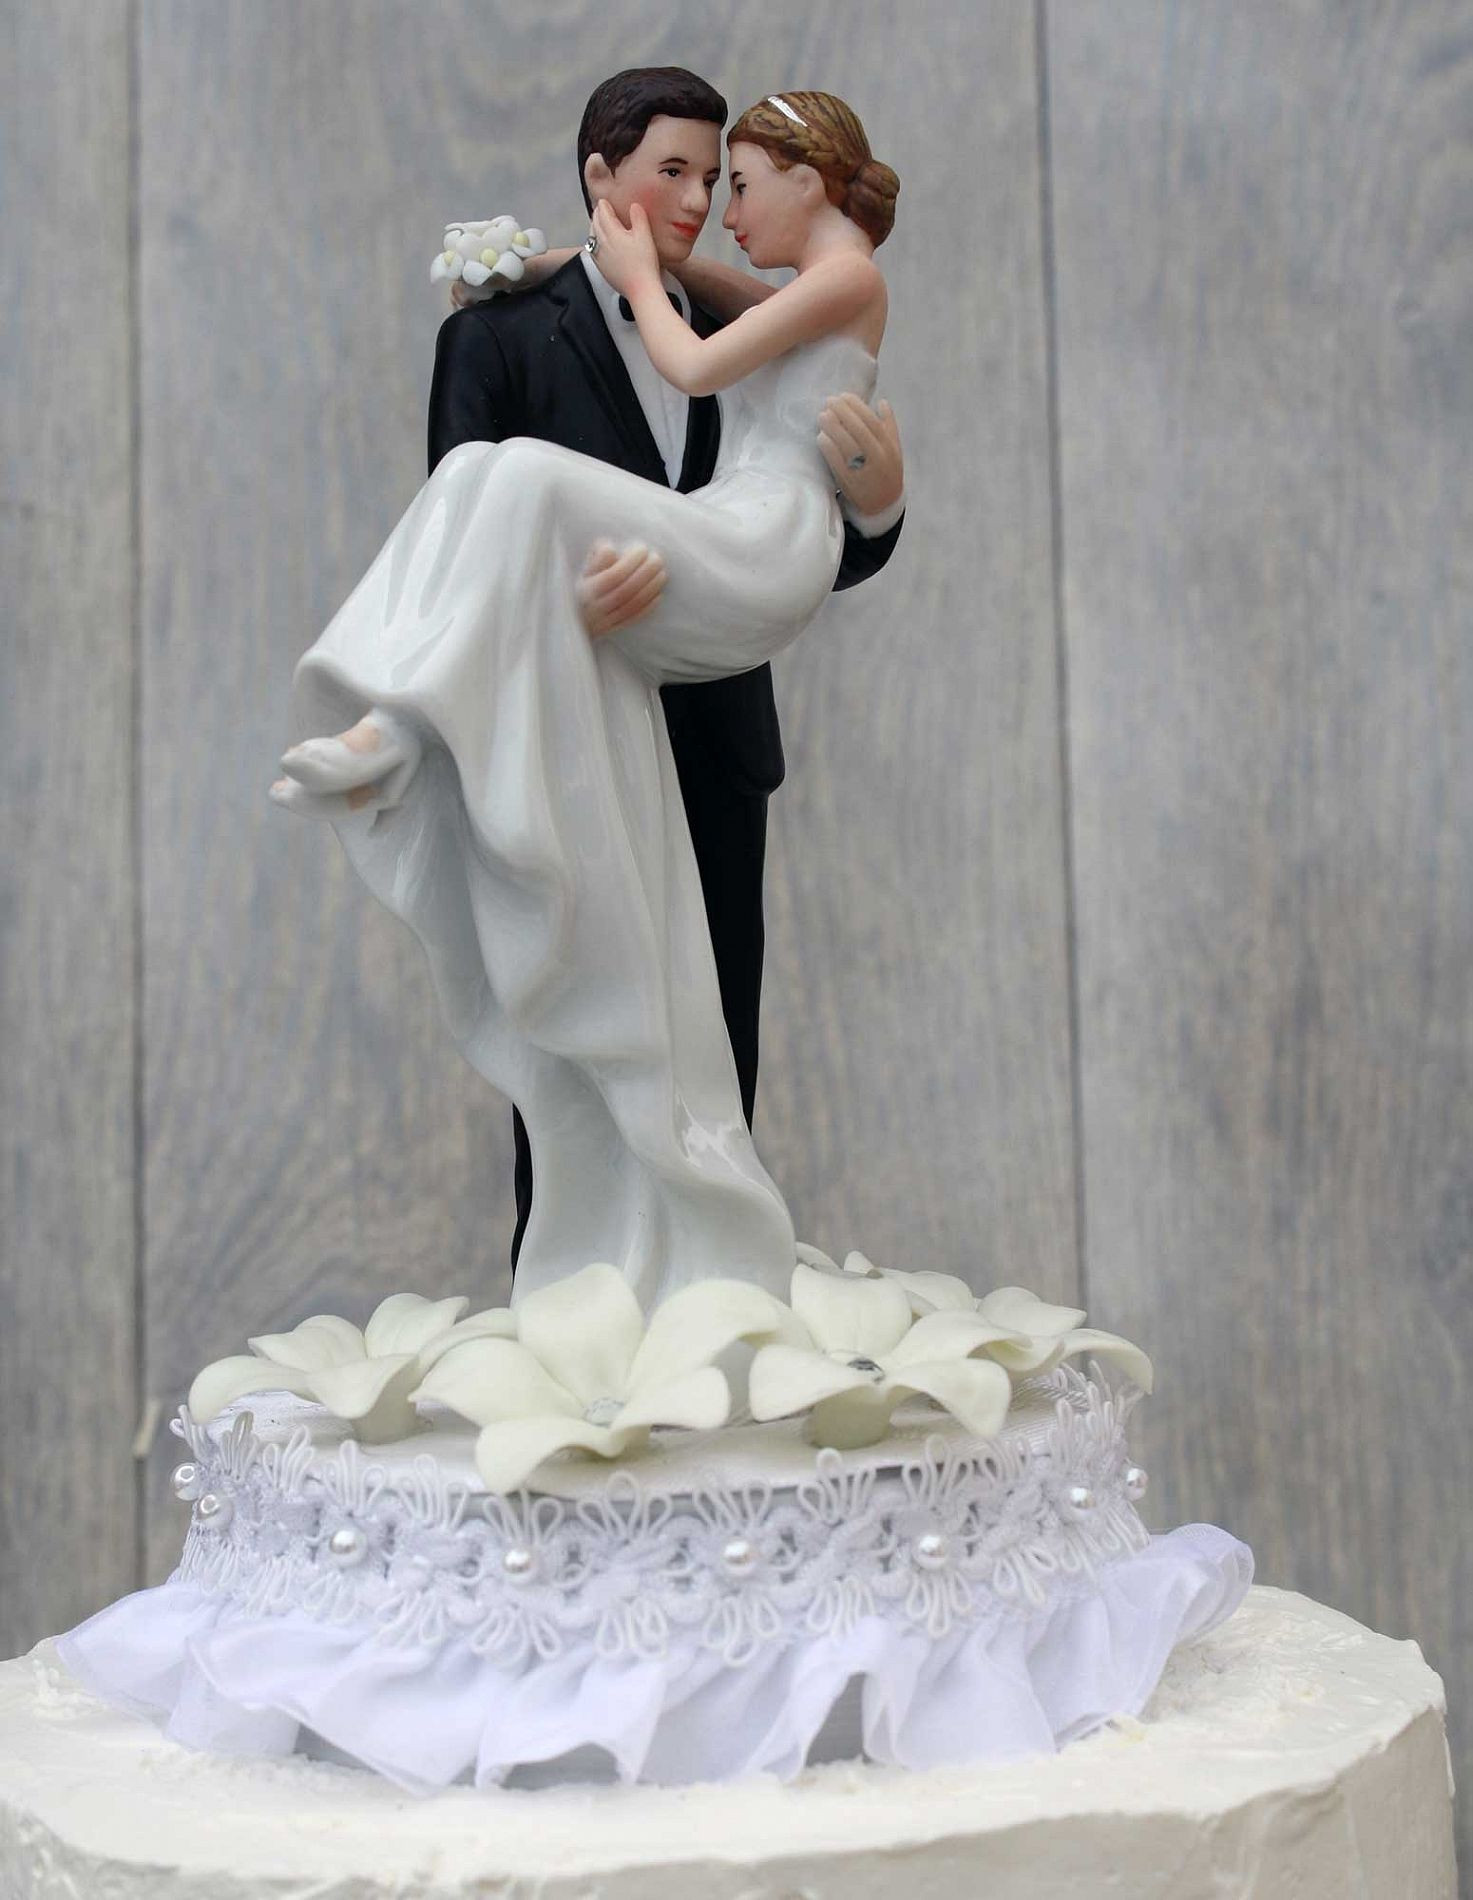 Wedding Cakes Bride And Groom
 Traditional wedding cake toppers bride and groom idea in